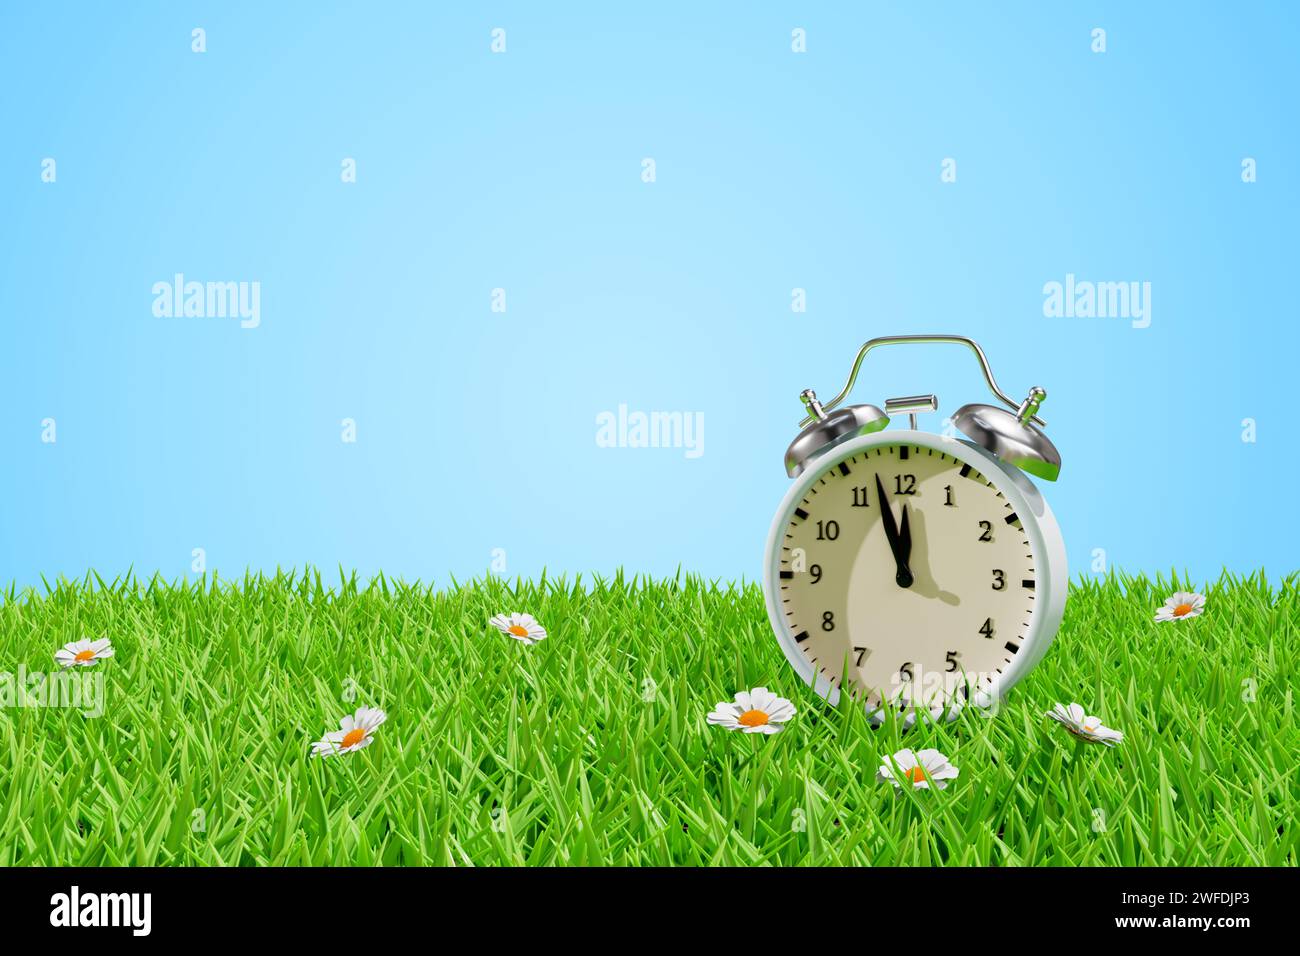 Alarm clock on a meadow in the grass. Daylight saving transitional change of season. 3d rendering Stock Photo